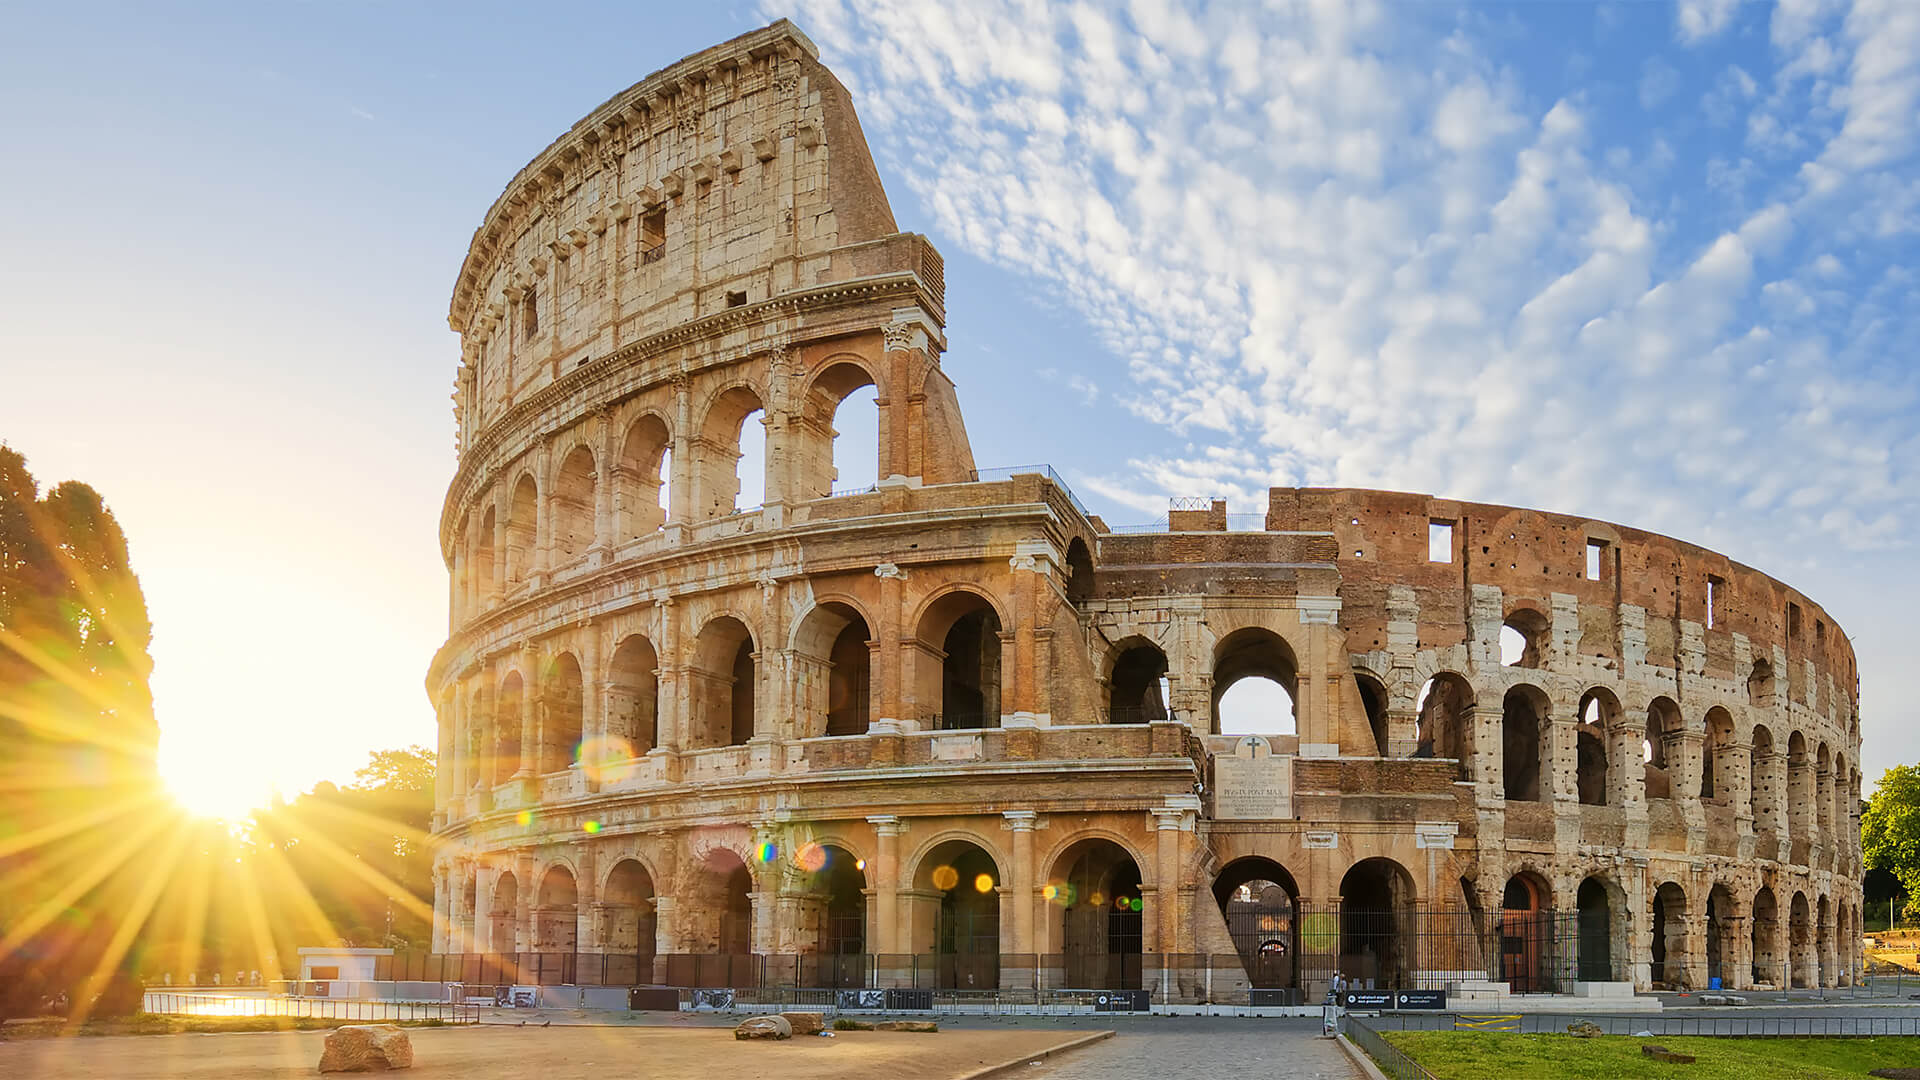 The Colosseum in Rome with the sun shining behind it